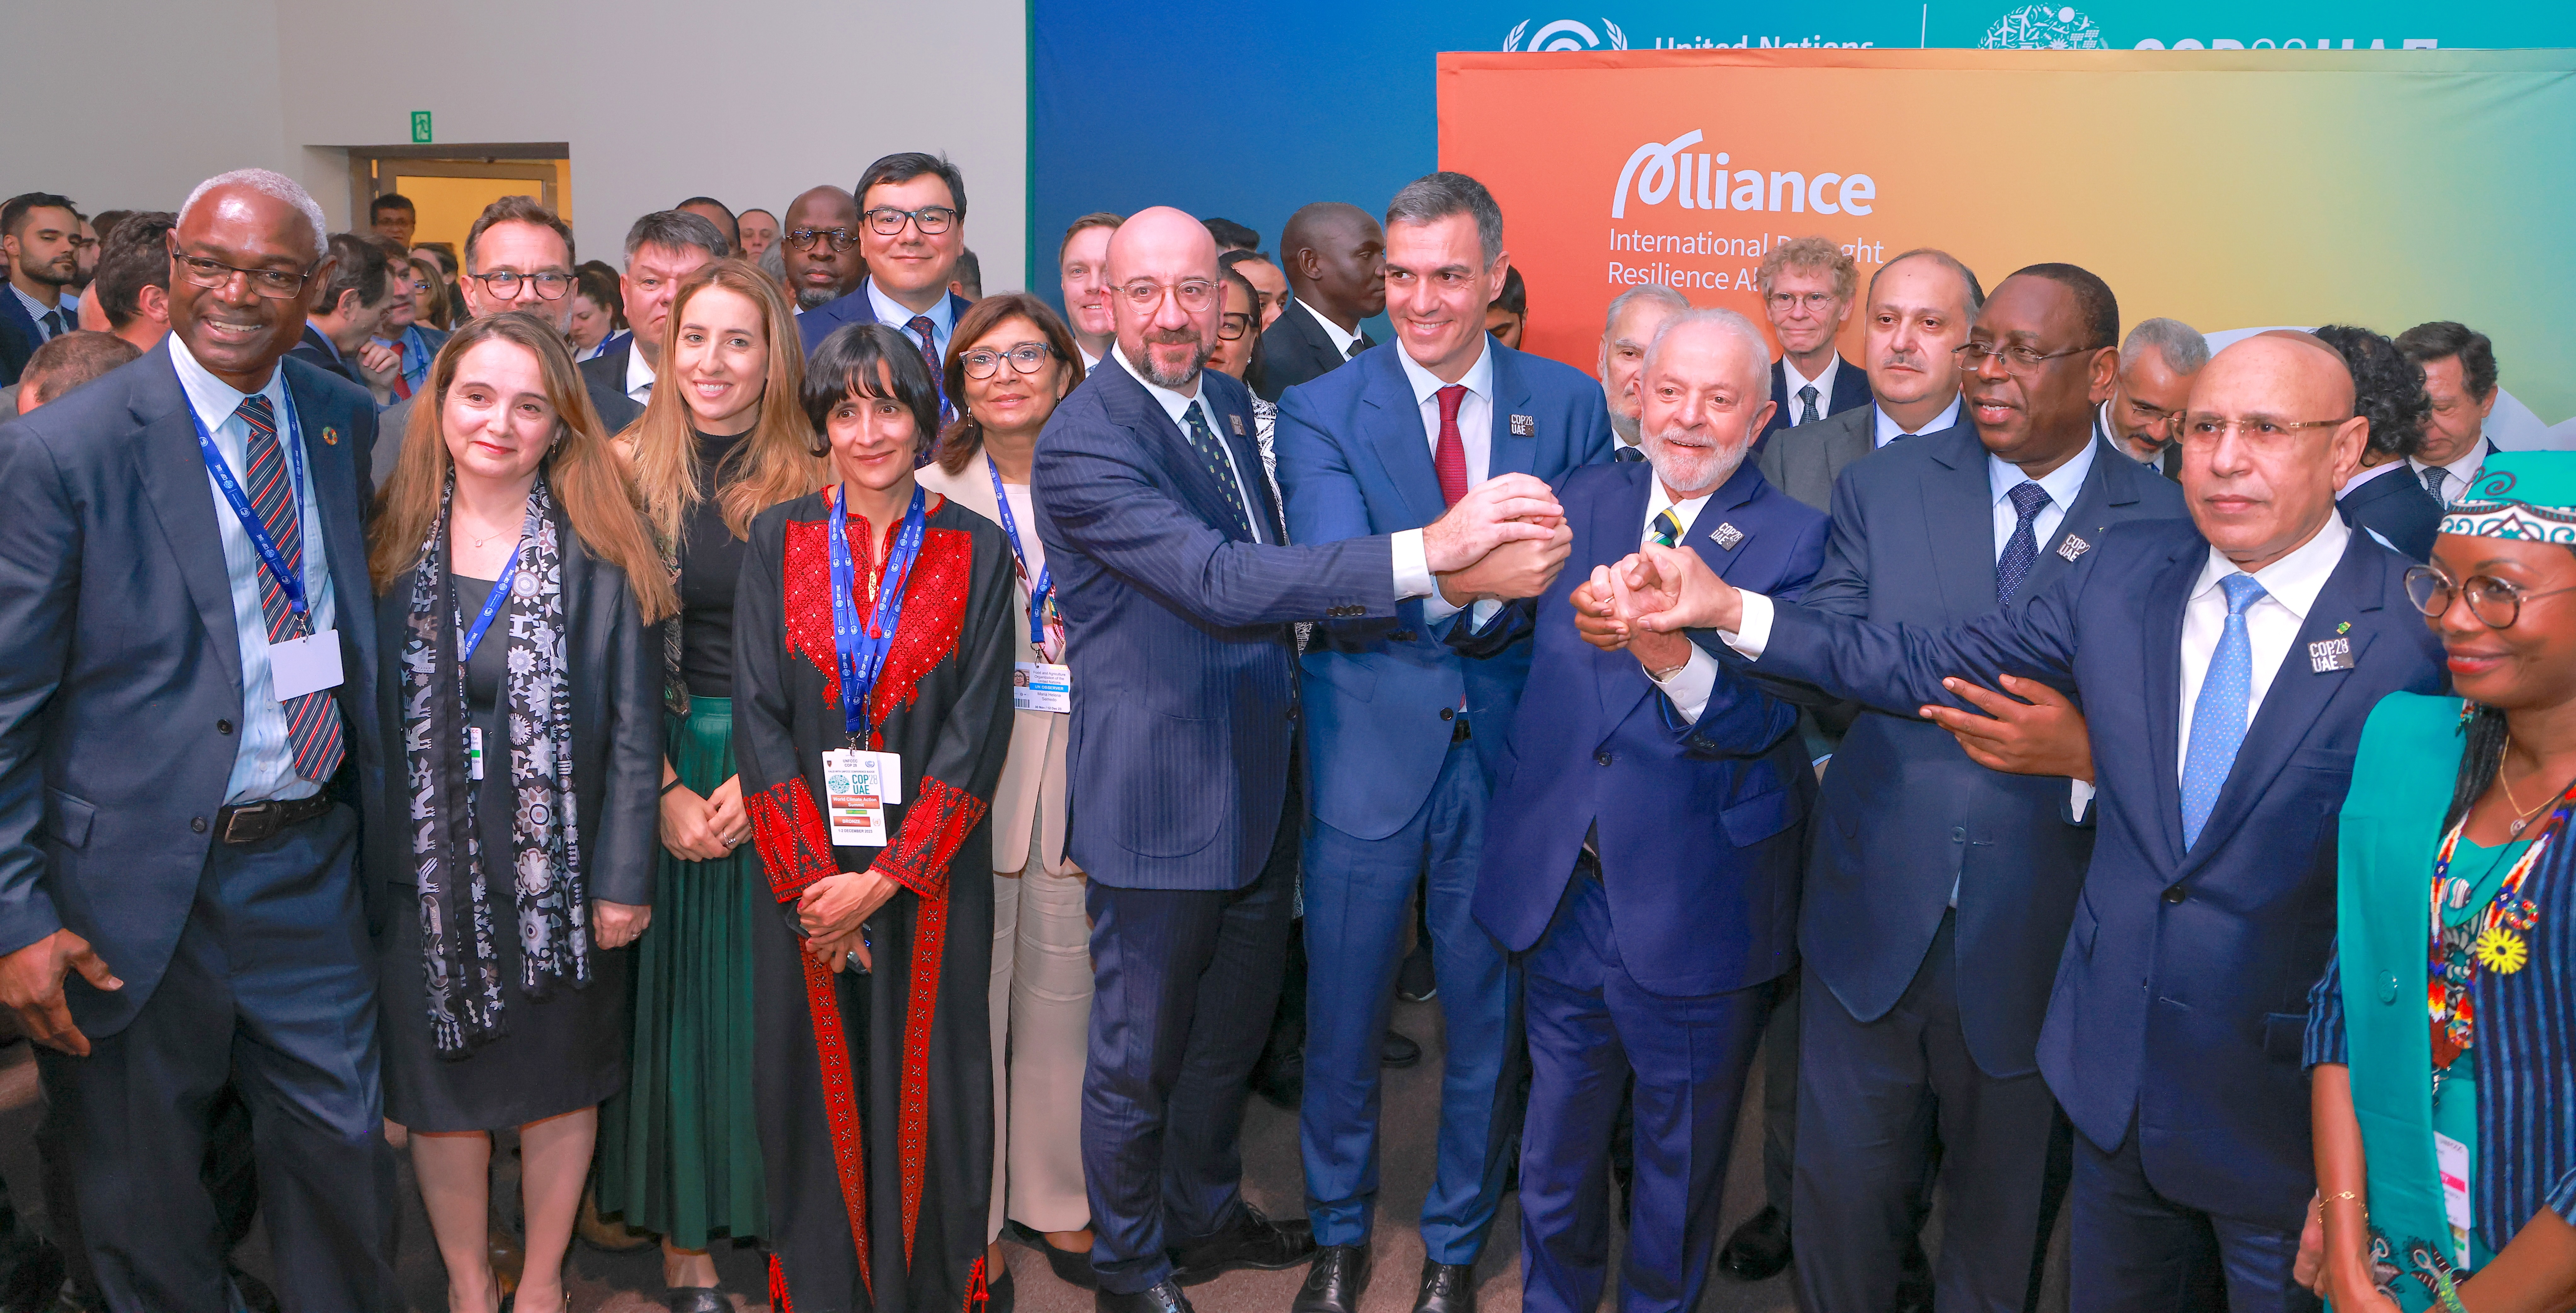 World leaders attended the International Drought Resilience Alliance (IDRA) at COP28. IDRA consists of 36 countries and 28 organizations working together to build resilience to drought. Photo: UNCCD